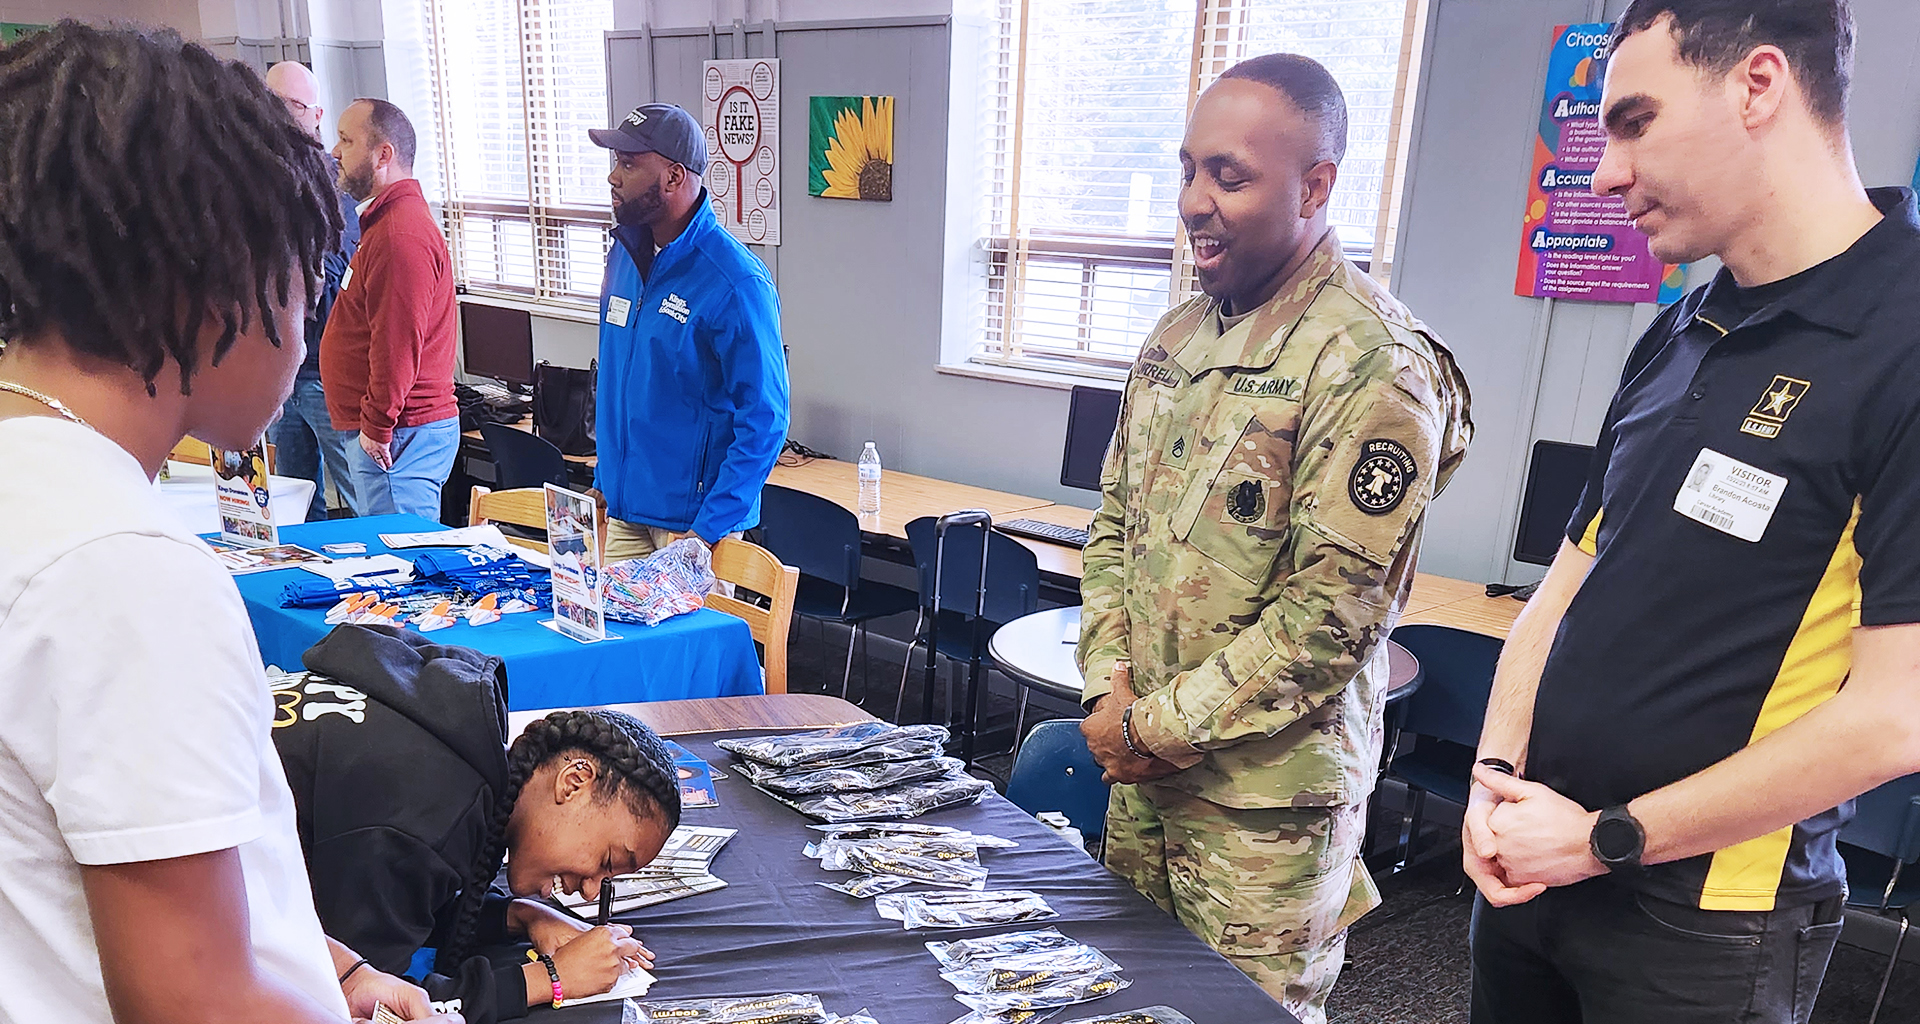 Students speaking to military at a job fair